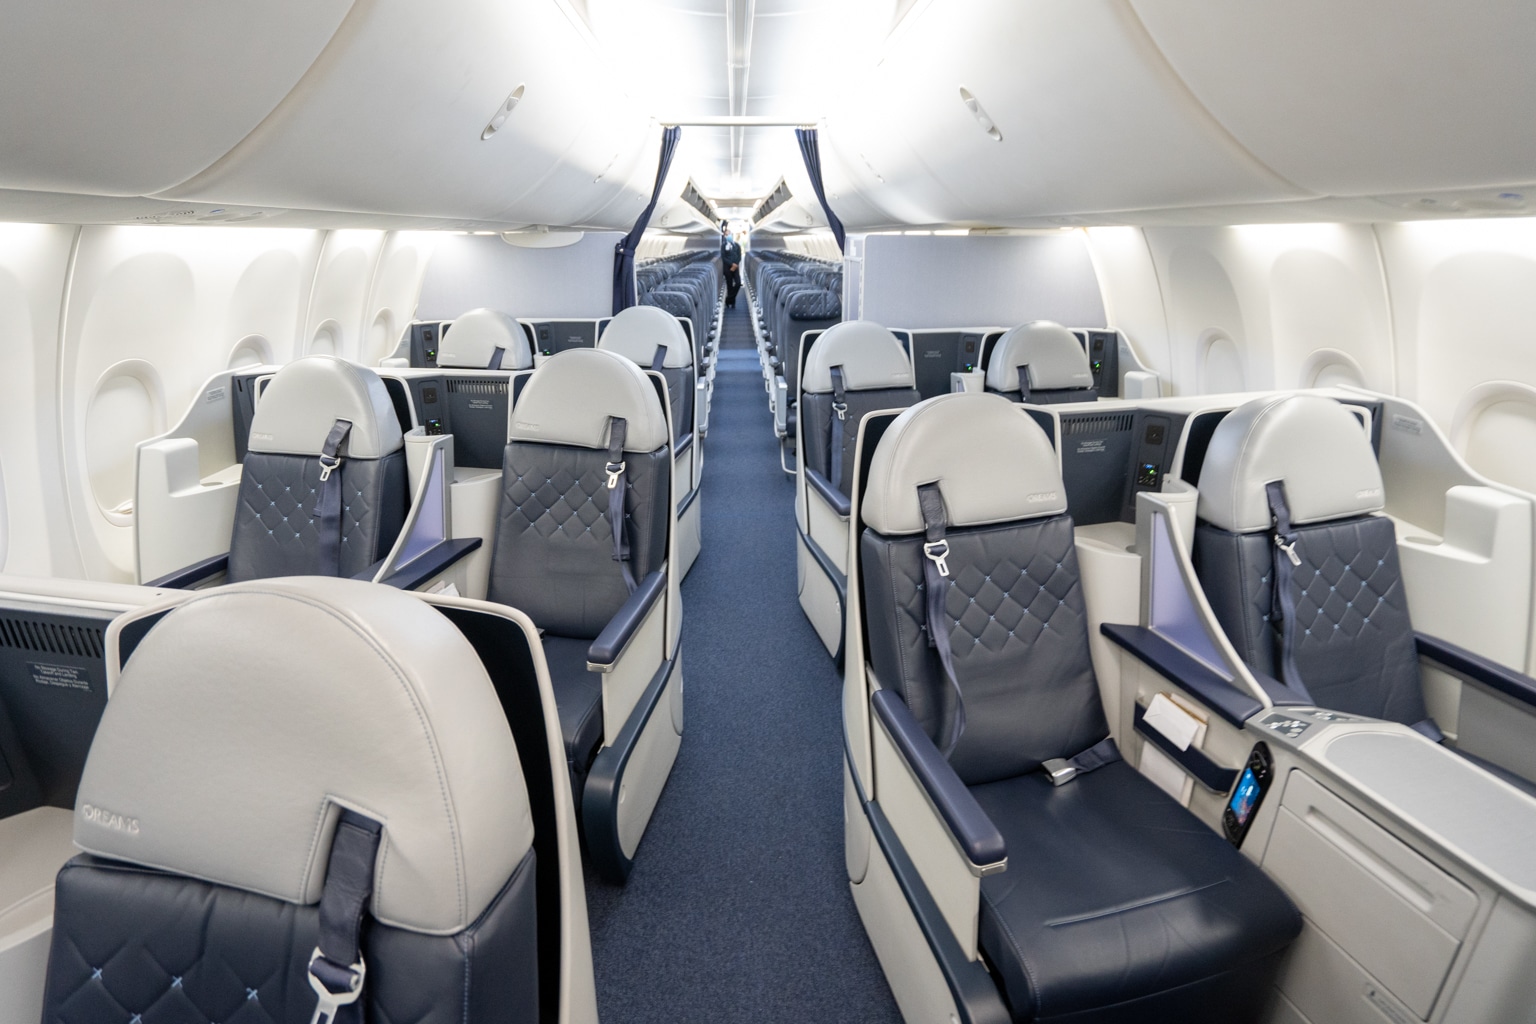 Is Copa Airlines Business Class worth it?